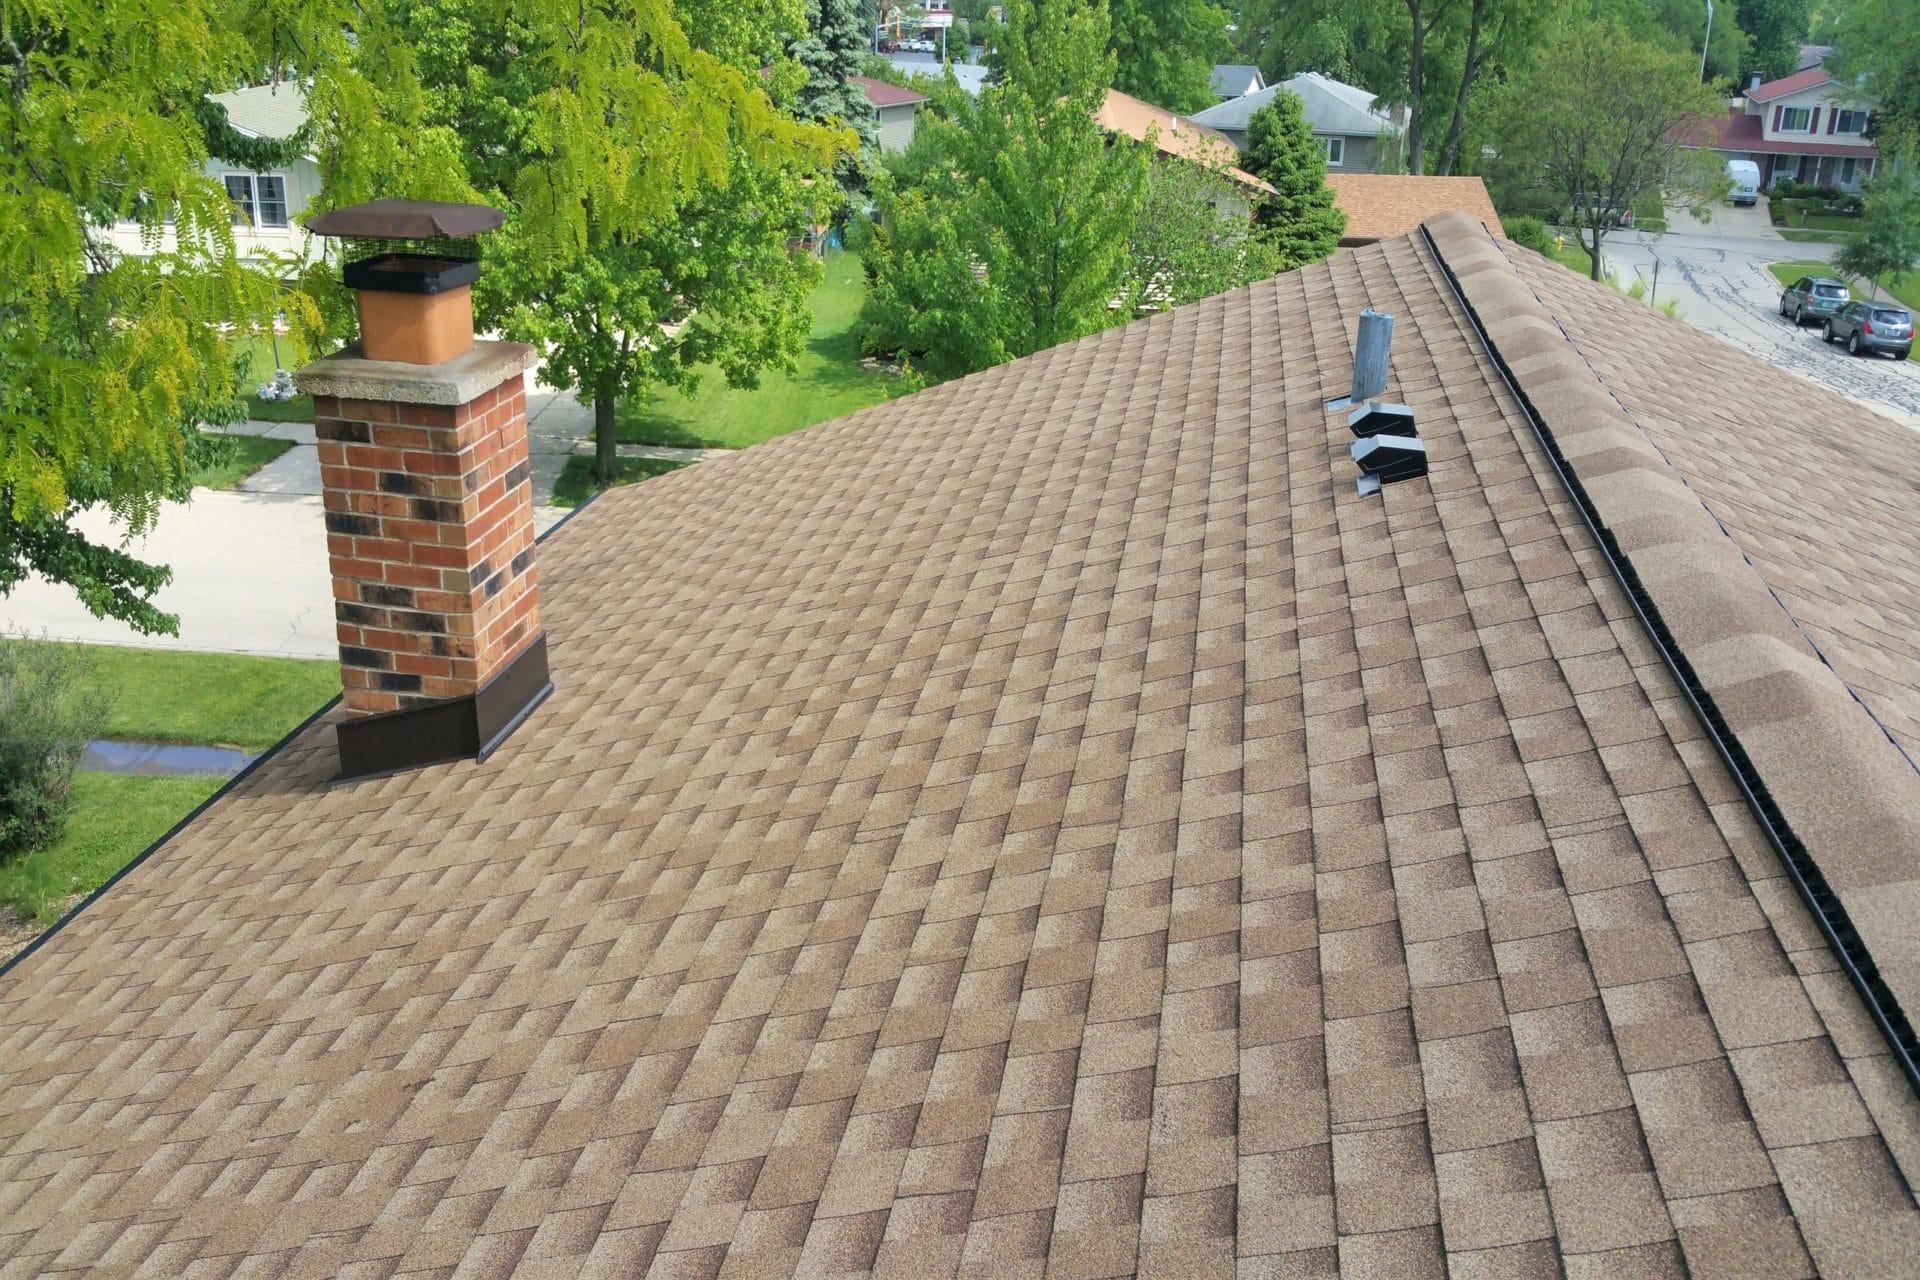 roofers chicago chicago chimney & fireplace roof repair - chicago roof services - services chicago - roof replacement chicago #chicagoroofingservice